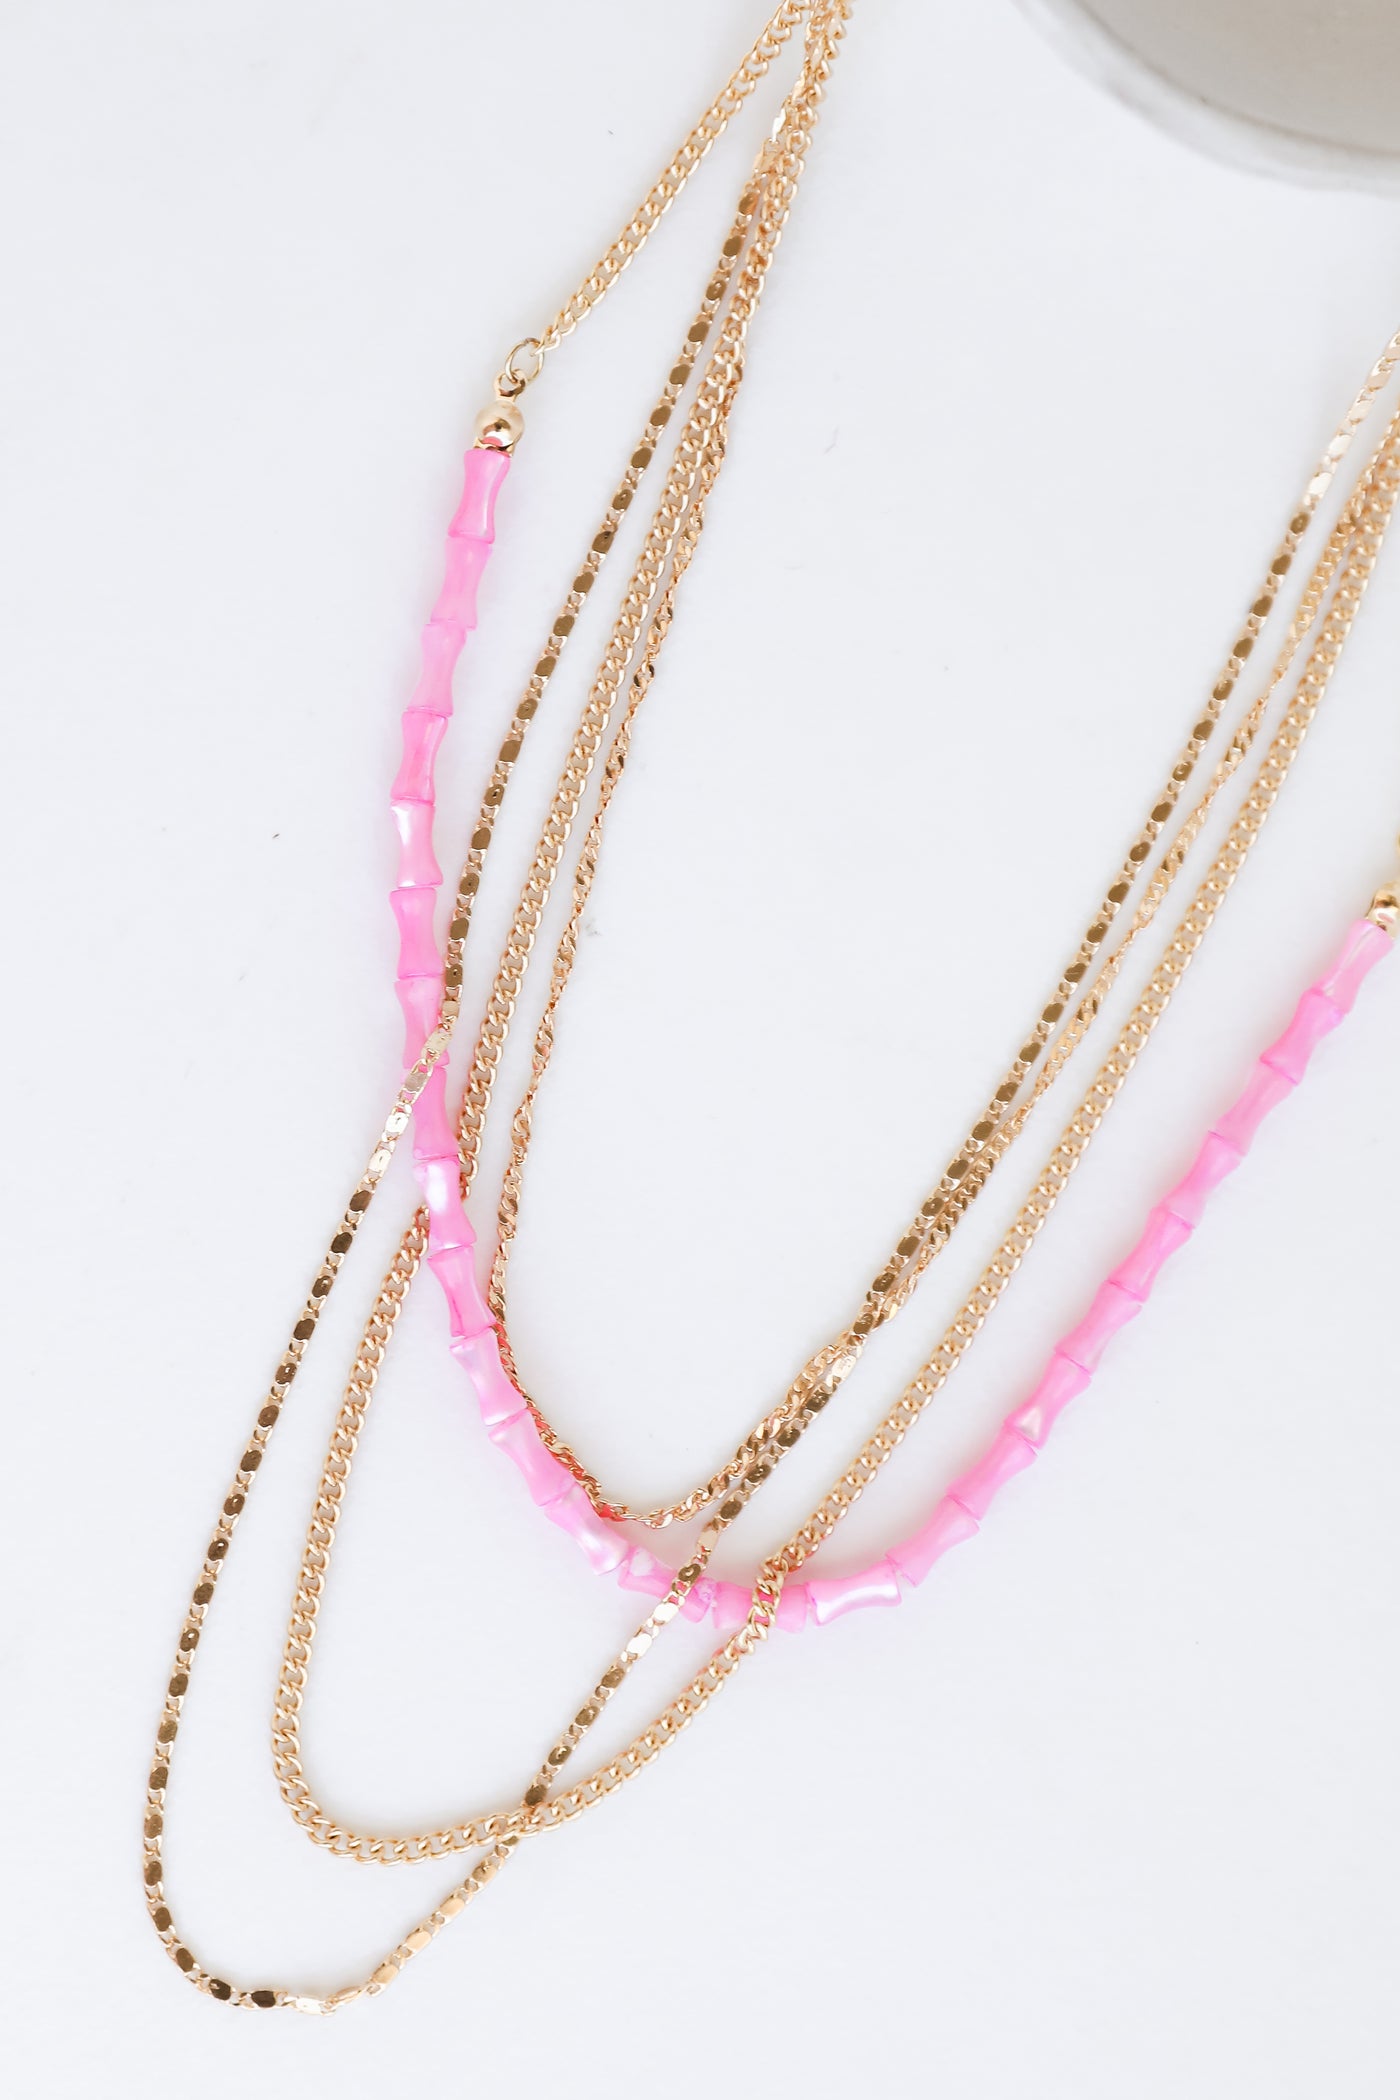 Gold Beaded Layered Chain Necklace close up